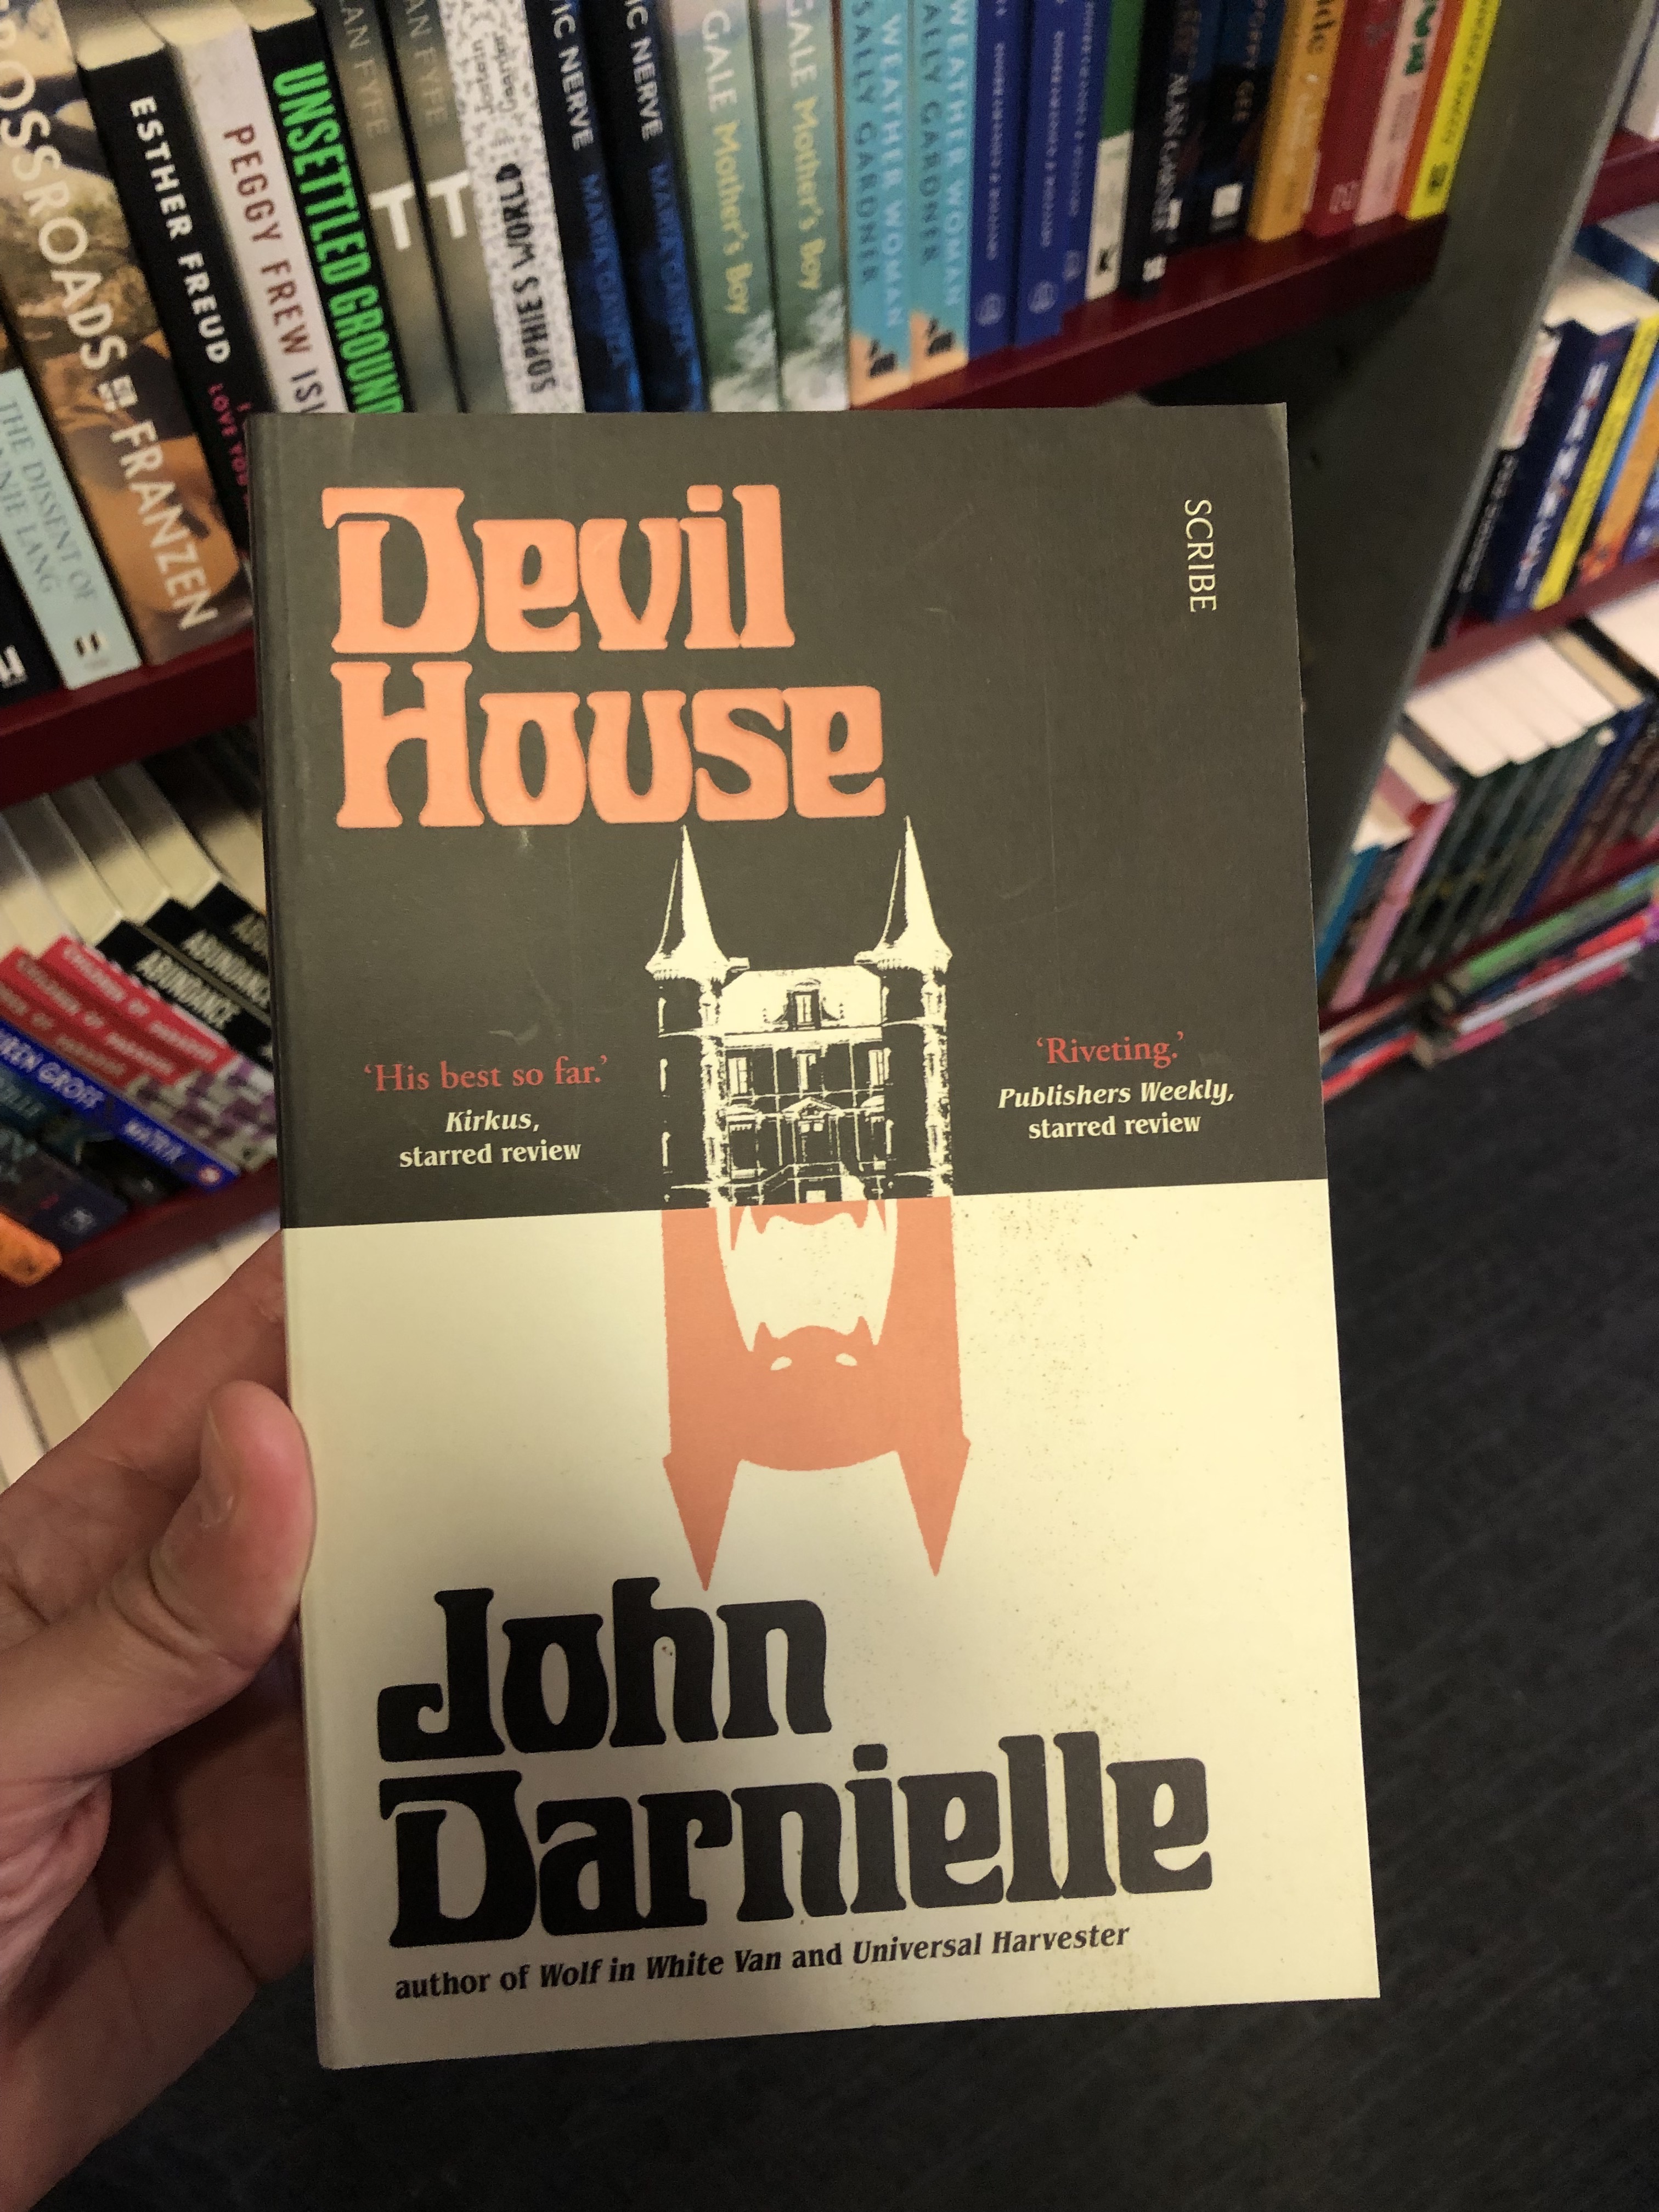 A hand is holding a copy of the book Devil House by John Darnielle. In the background are bookshelves.